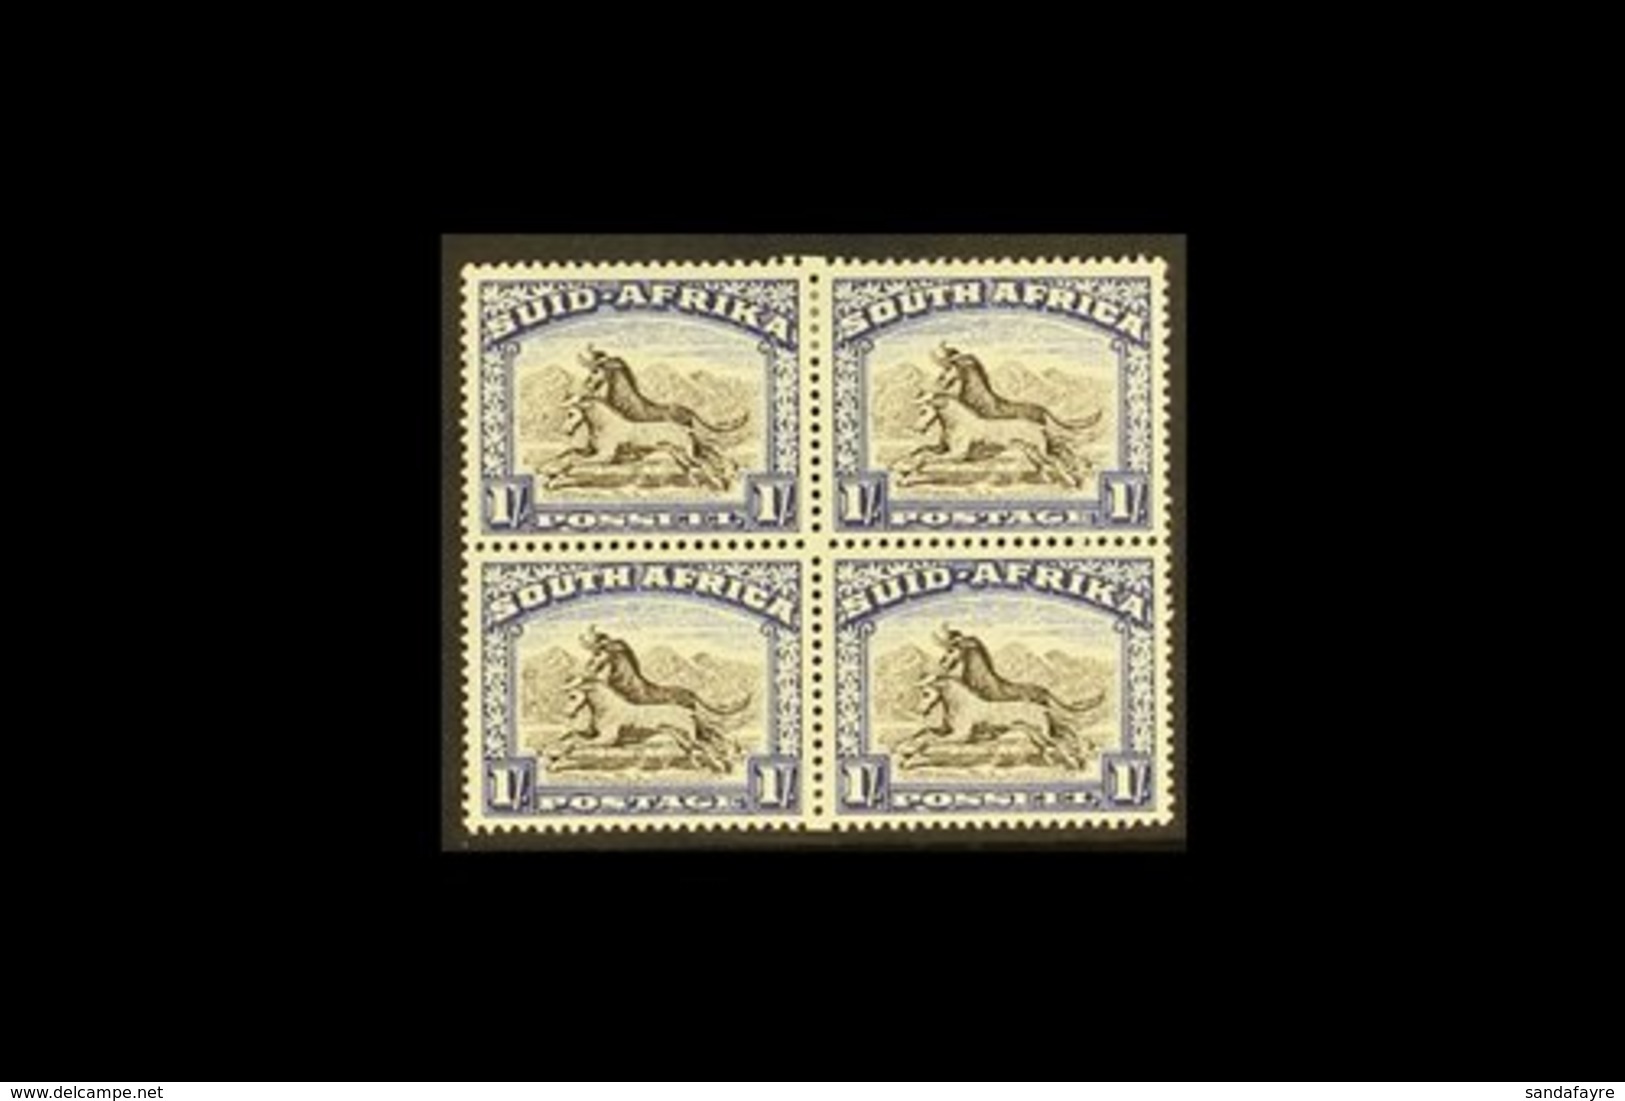 1947-54  1s Blackish Brown & Ultramarine, Issue 5, MISSING PERF HOLE At Centre Of Block Of 4, Union Handbook V4, SG 120a - Unclassified